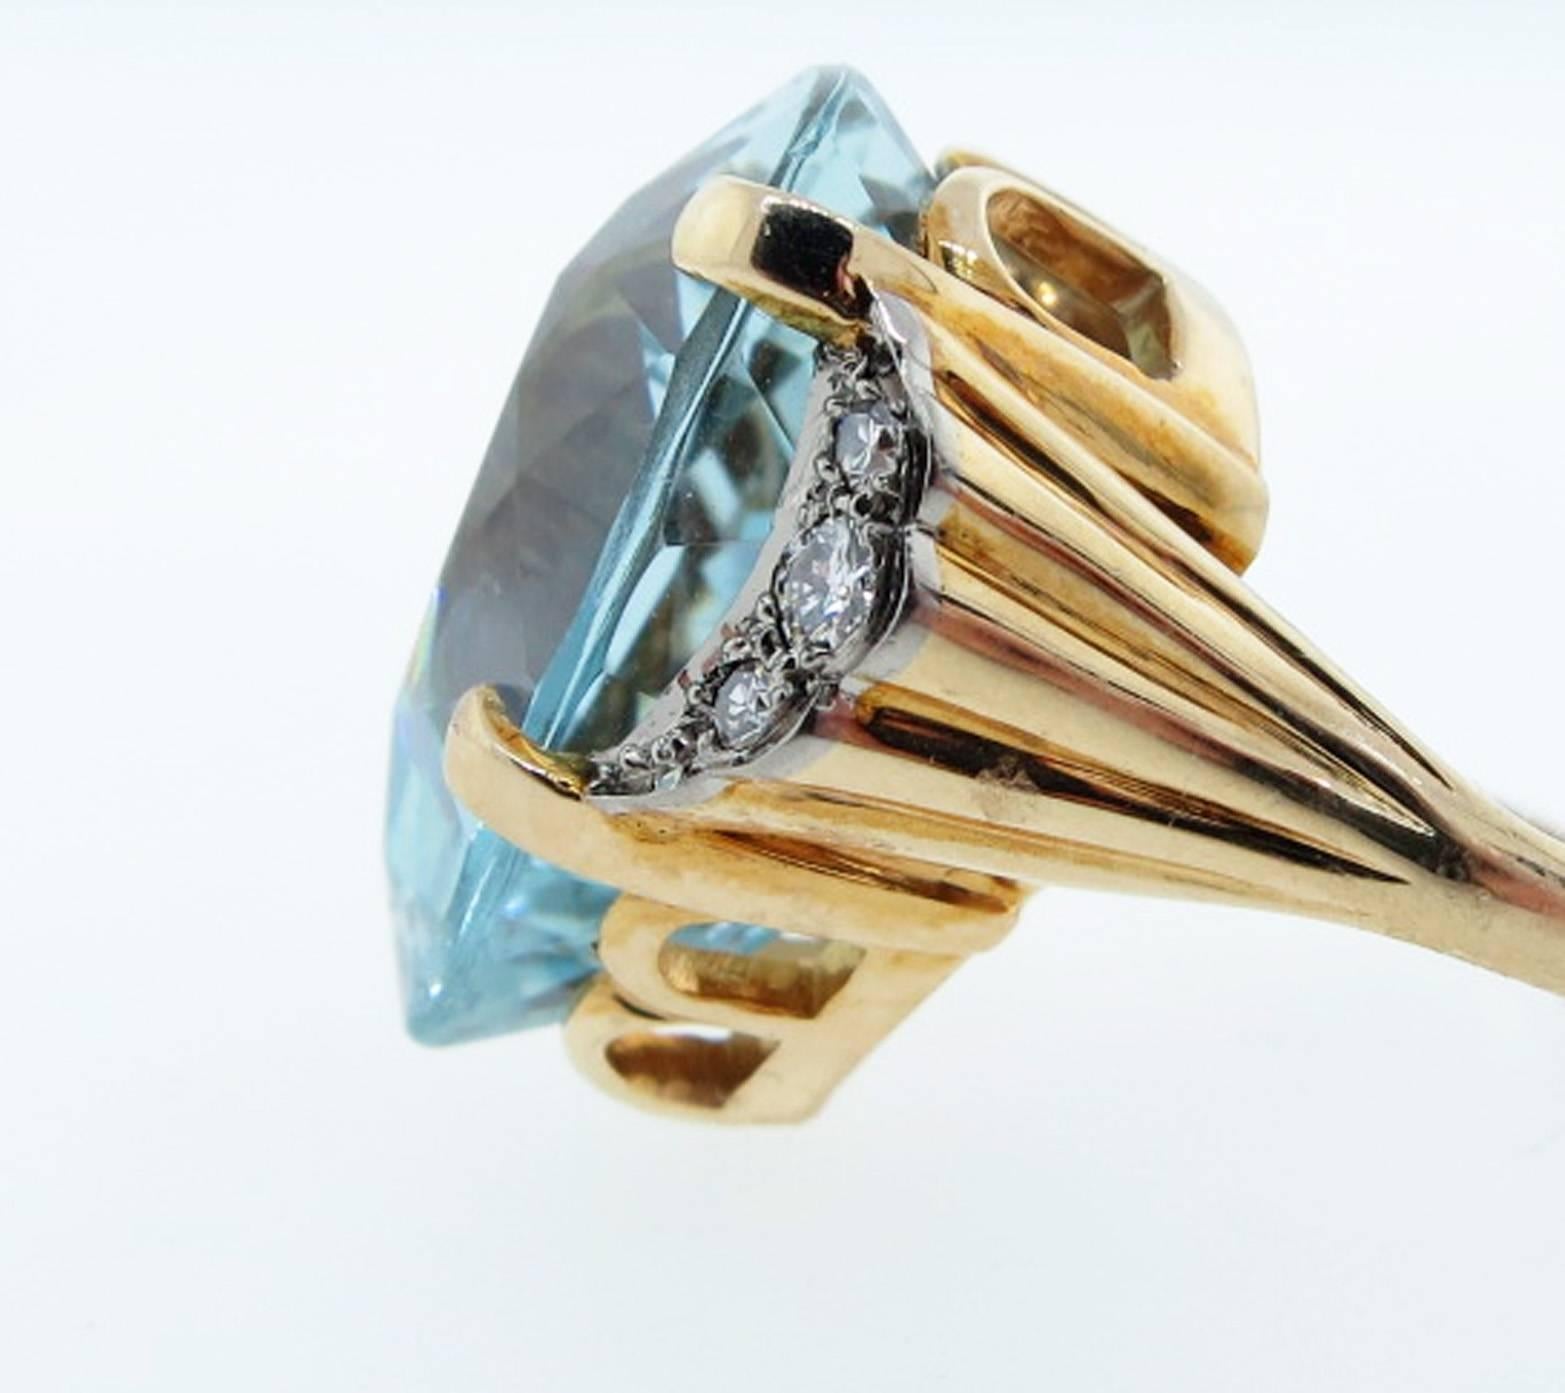 Gleaming 14kt. yellow gold handmade aquamarine and diamond ring. The center is set with a fine color faceted natural aquamarine weighing approx 20.0cts. Each shoulder is bead set in white gold with 3 round brilliant cut diamonds totaling approx .20